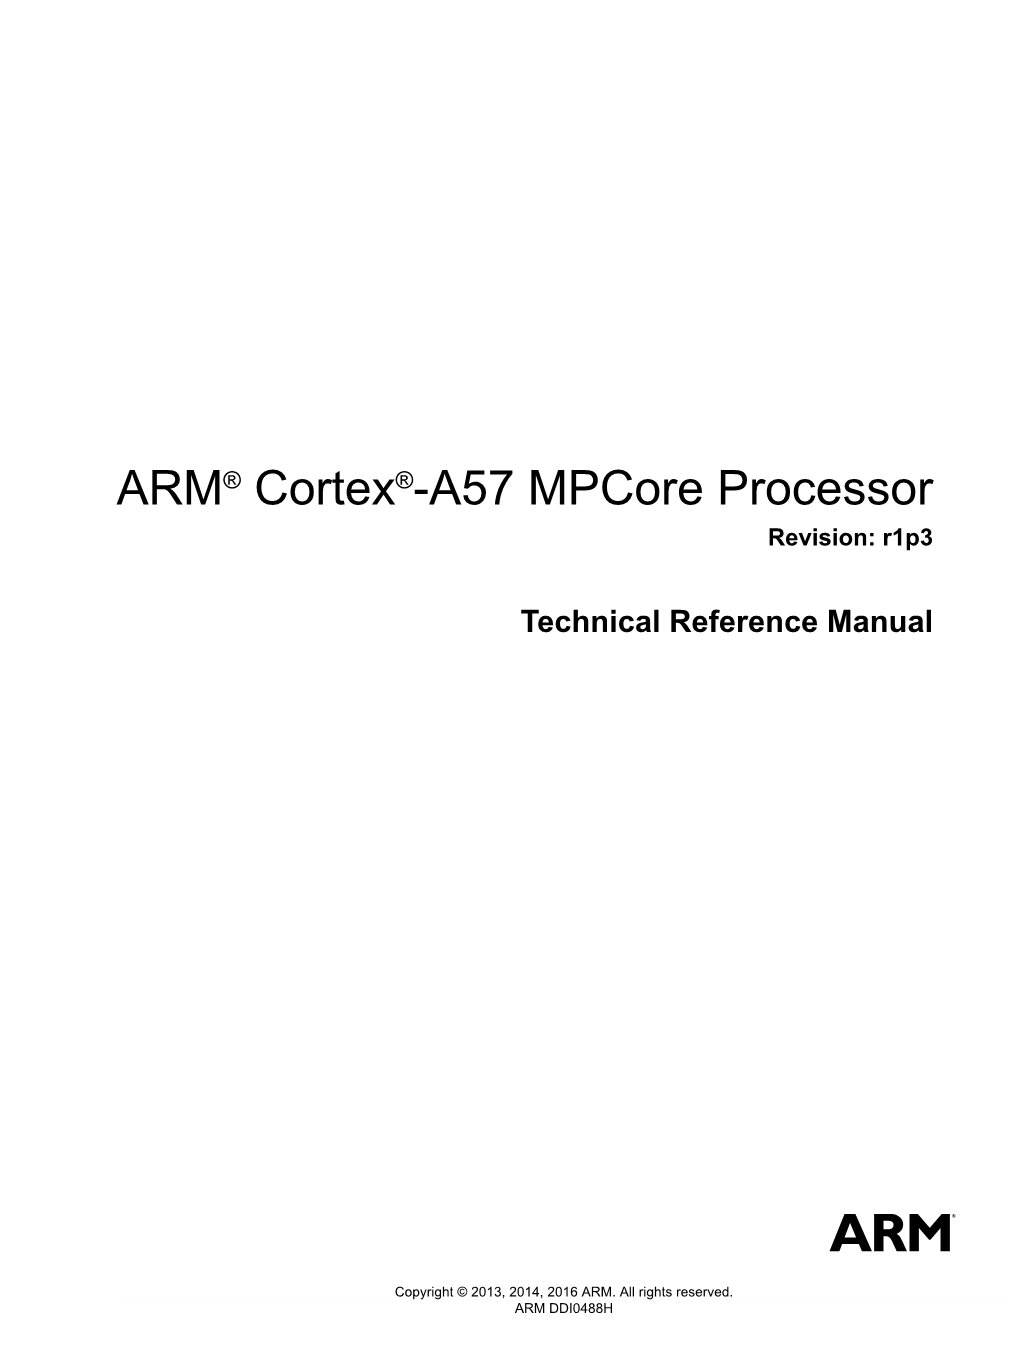 ARM® Cortex®-A57 Mpcore Processor Technical Reference Manual Copyright © 2013, 2014, 2016 ARM